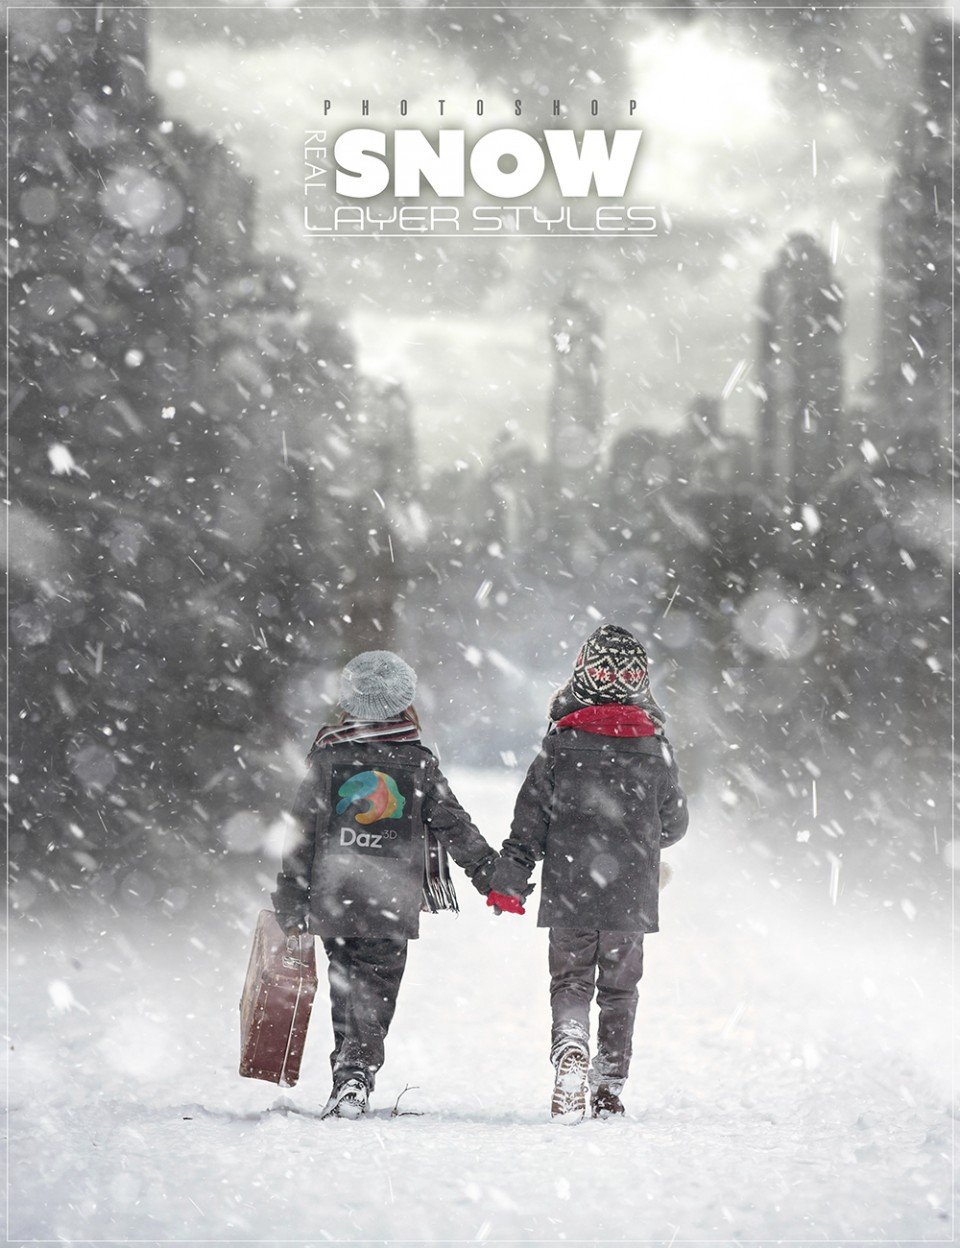 Ron’s Real Snow Layer Styles_DAZ3DDL